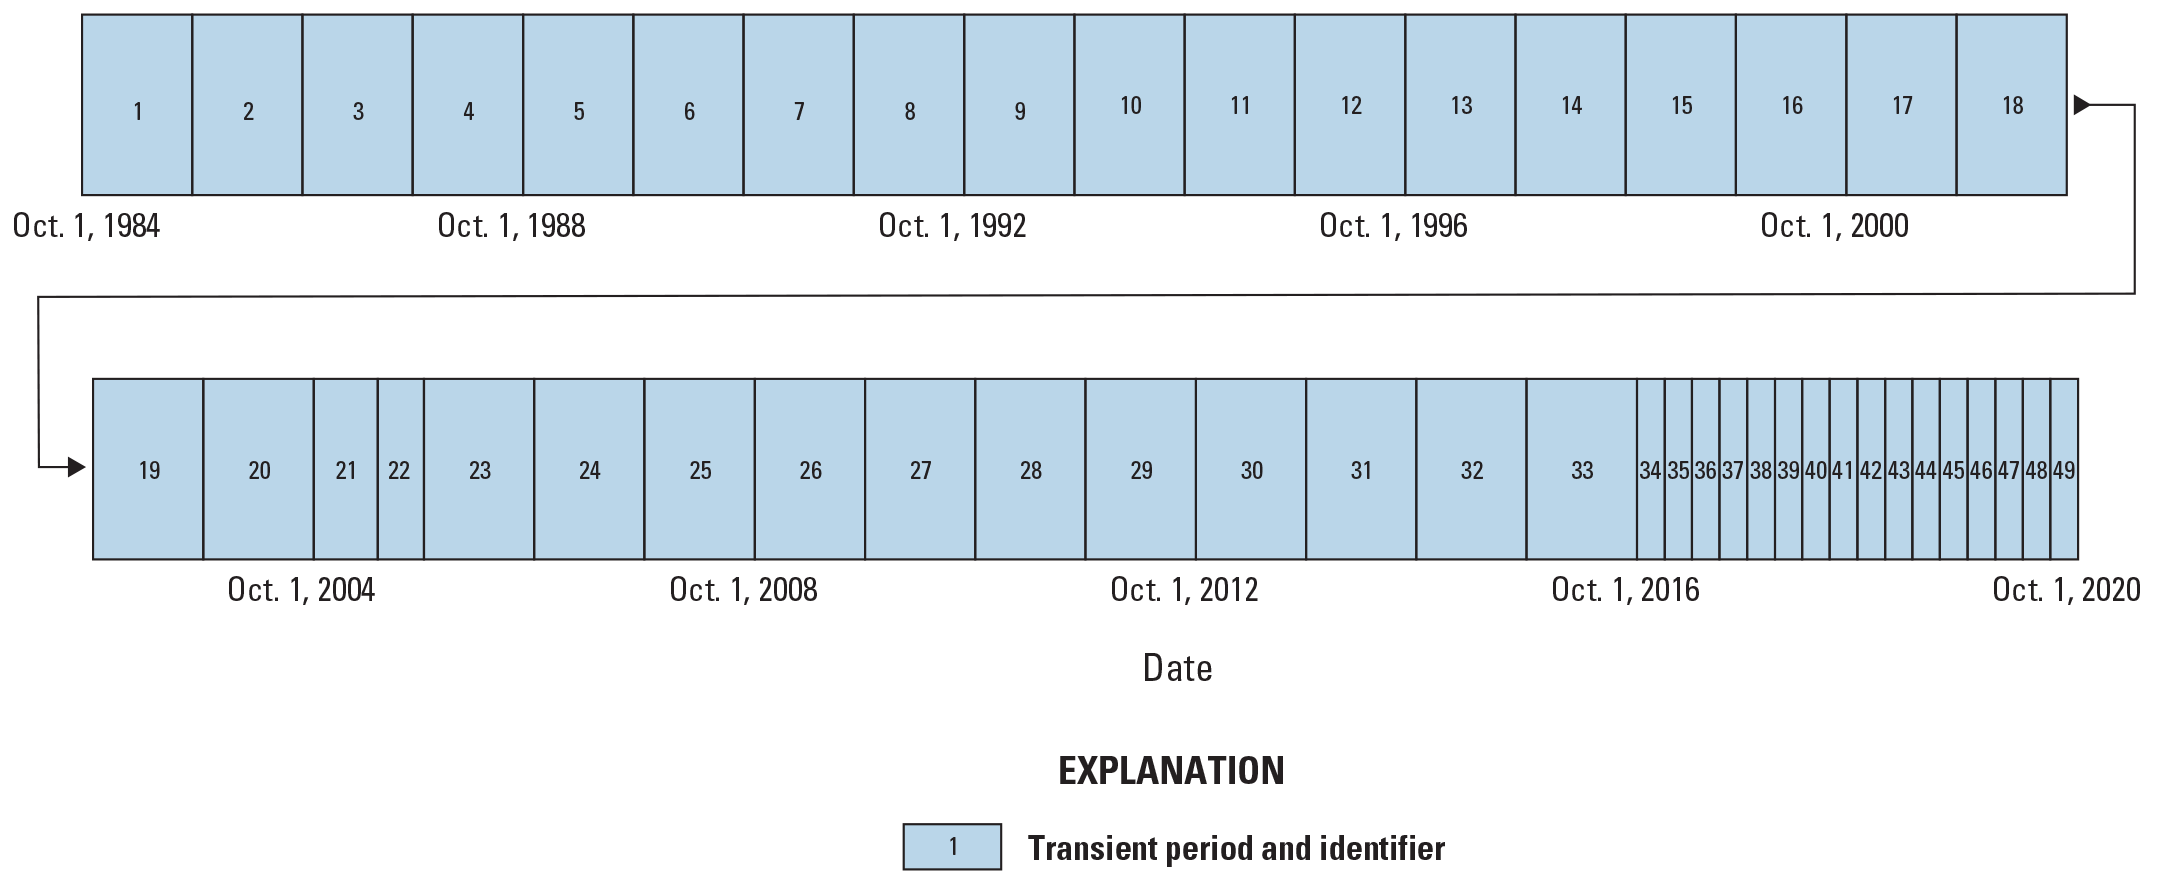 The periods before October 1, 2016, are longer than the periods after that date.